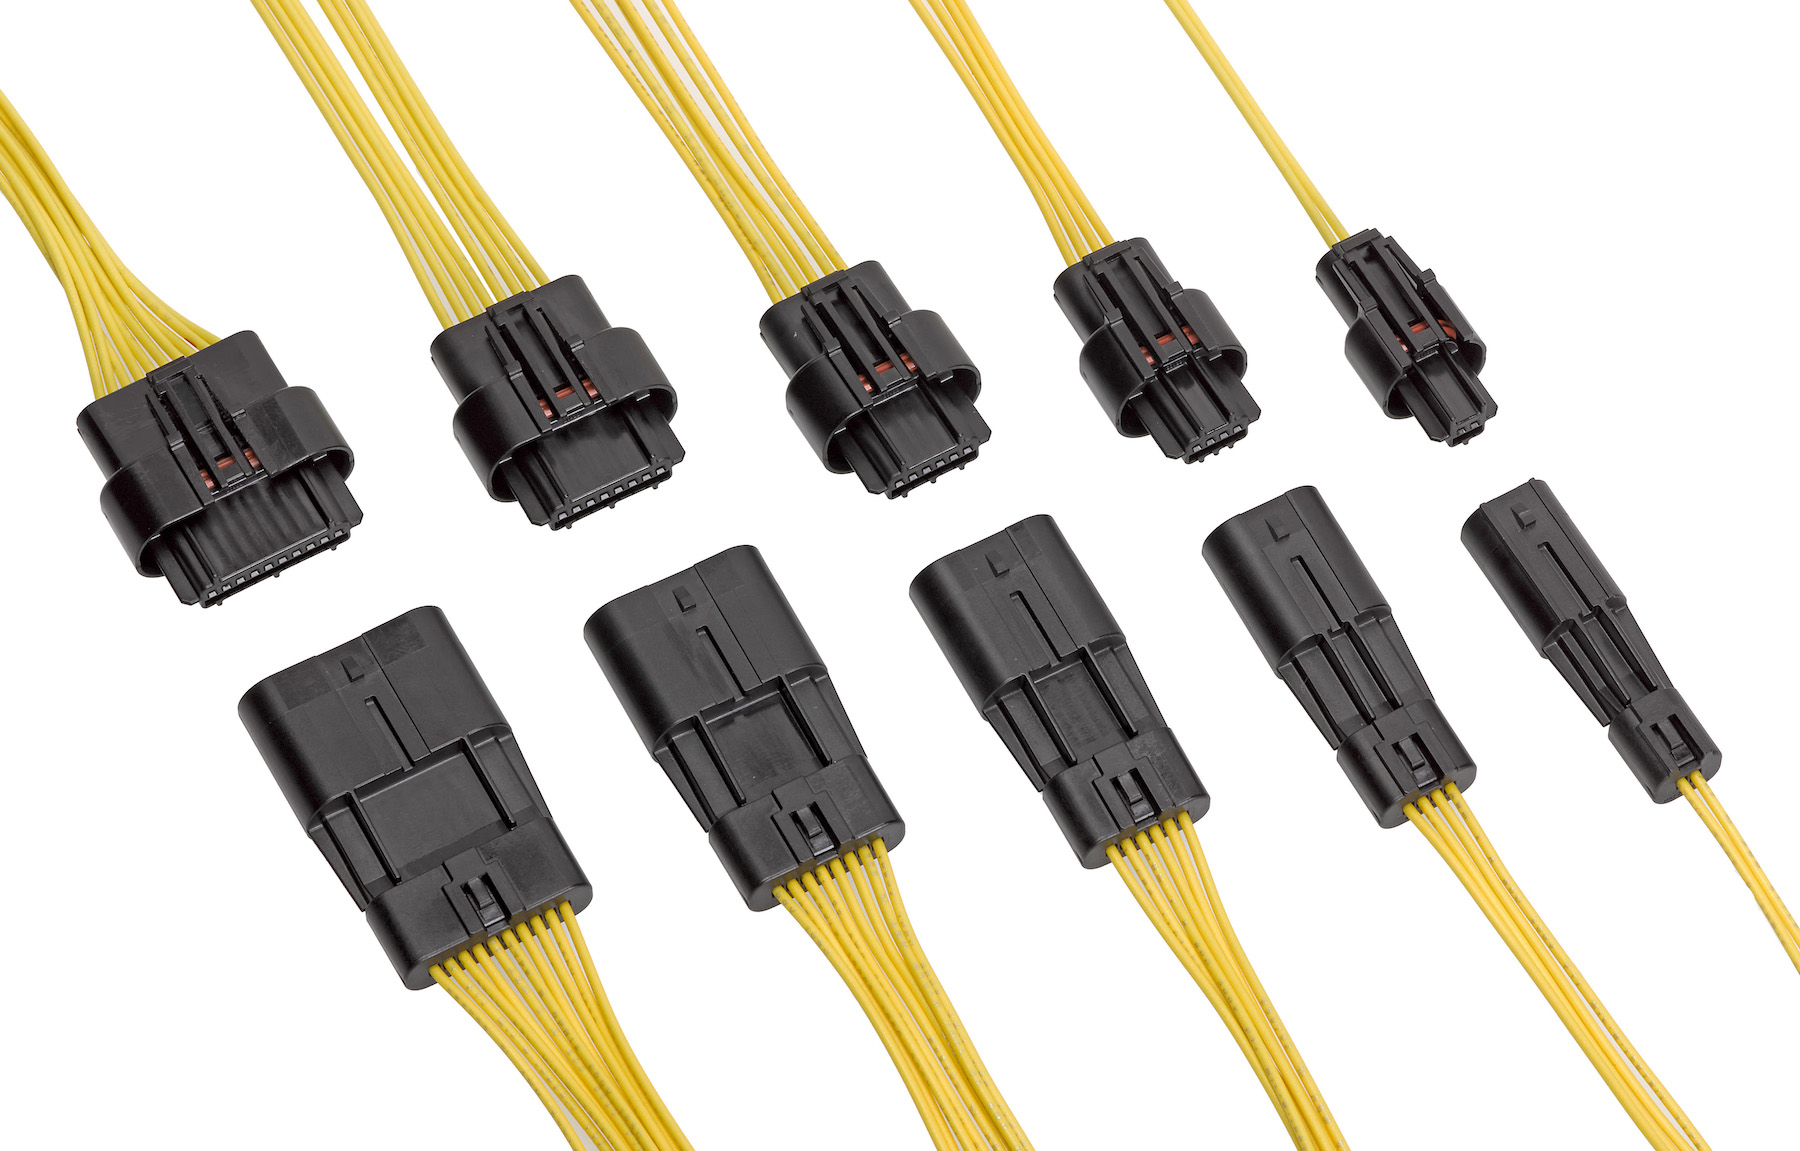 Automotive Cable Manufacturers: What No One Is Talking About